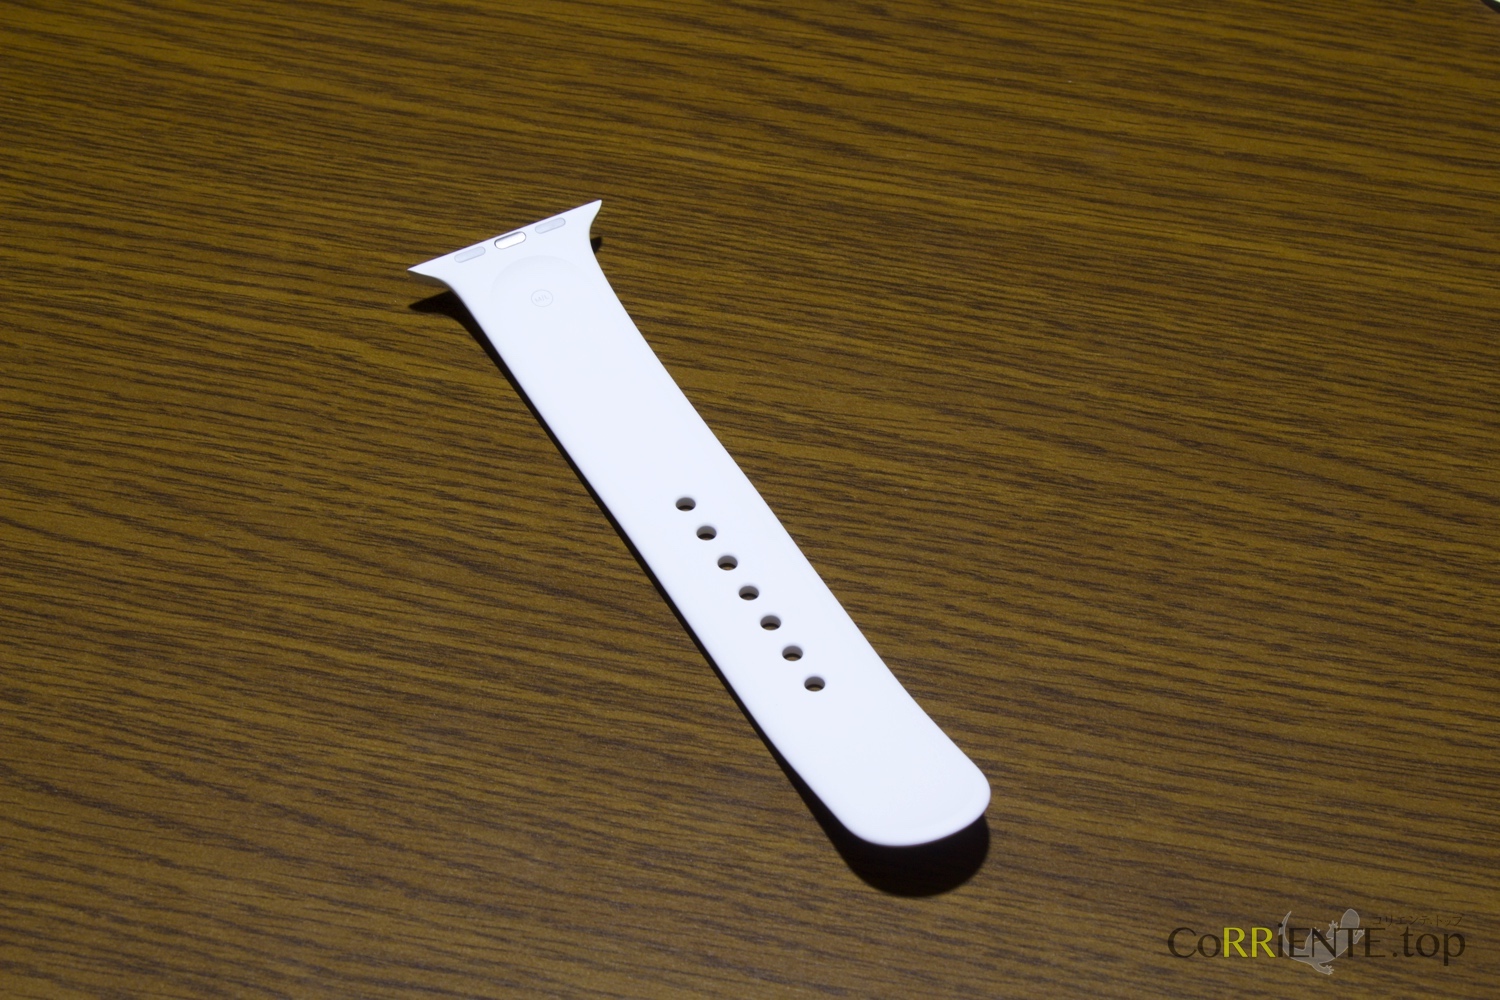 applewatch-review-2